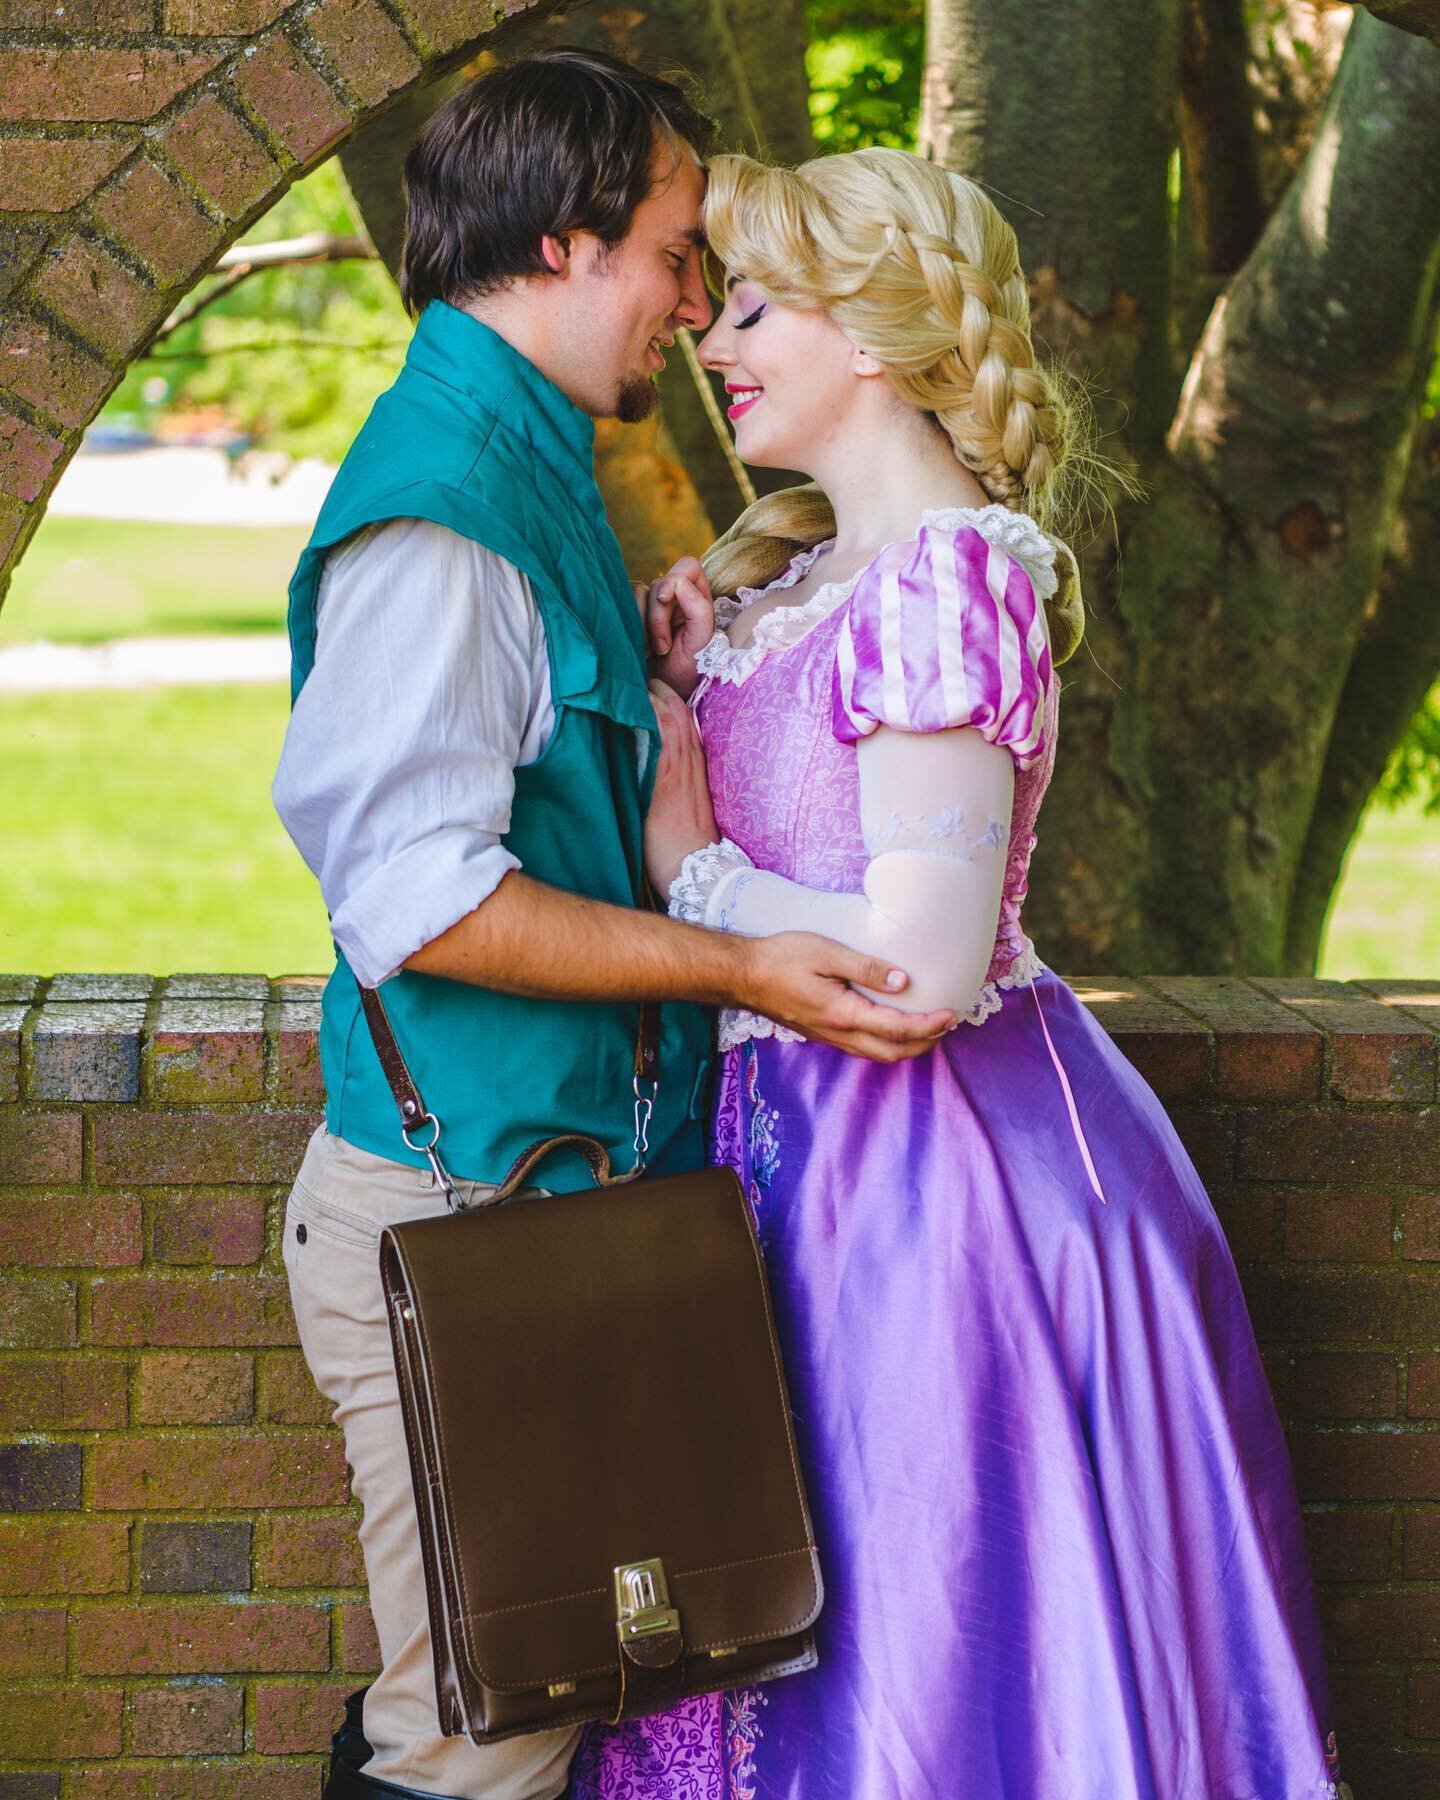 It's #TrueLoveTuesday! This week's royal couple is Rapunzel and her Ruffin Prince! Book them together to find a new dream and save! 💜
✨✨🍳💼 🌼🦎✨✨
Book at www.sparkadreamprincessparties.com!
.
📸: @jennplantography 
.
.
.
.
.
.
.
.
.
.
.
.
.
.
.
#D